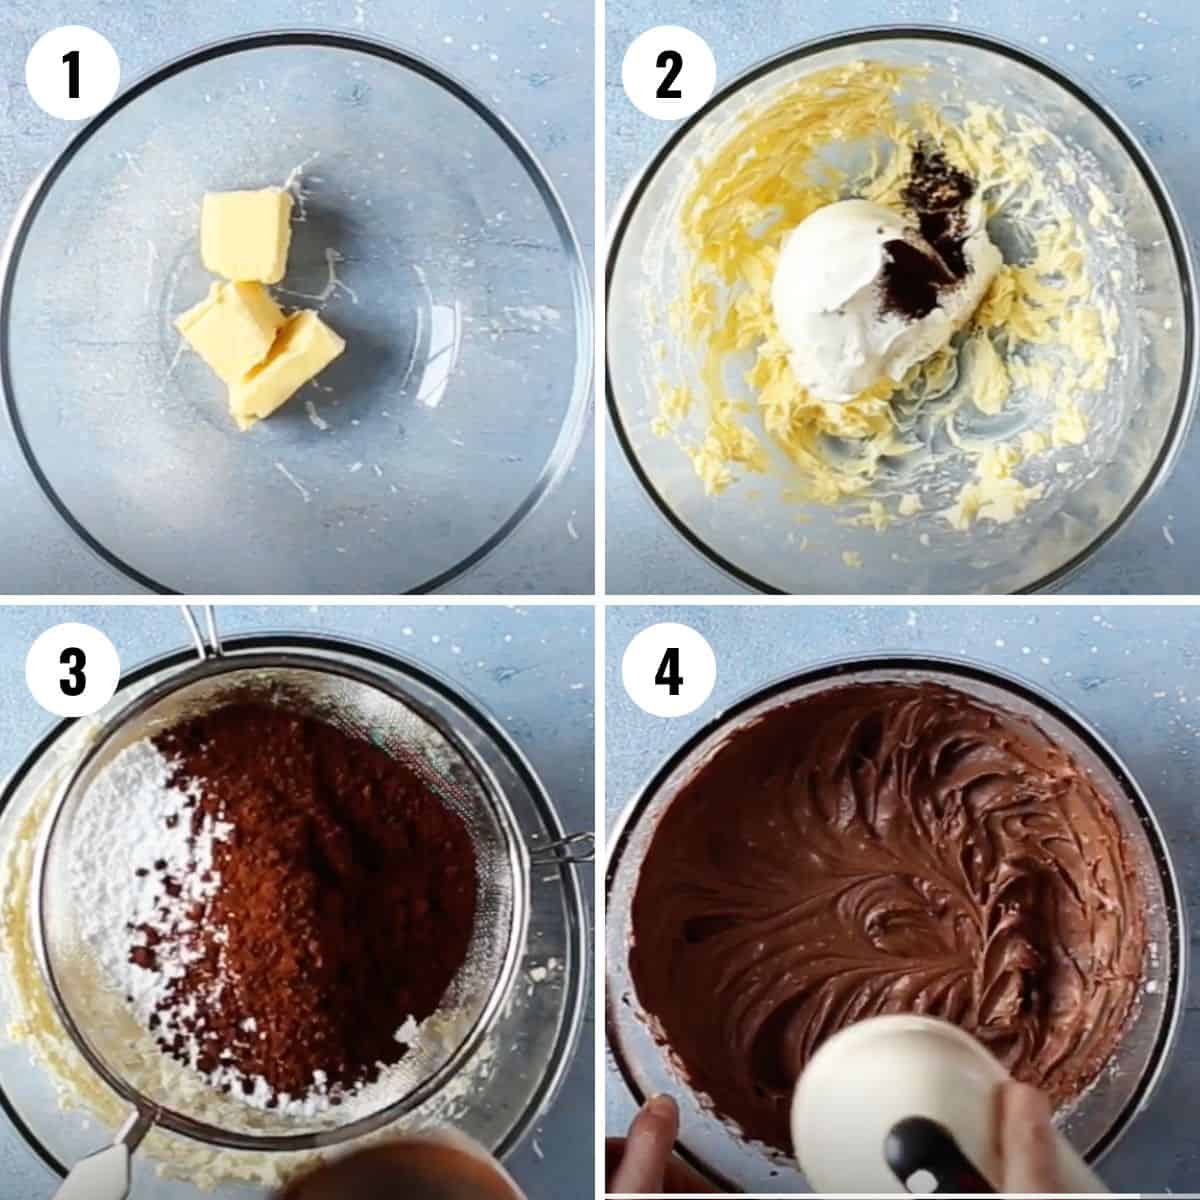 A collage showing the steps for mixing the chocolate frosting.